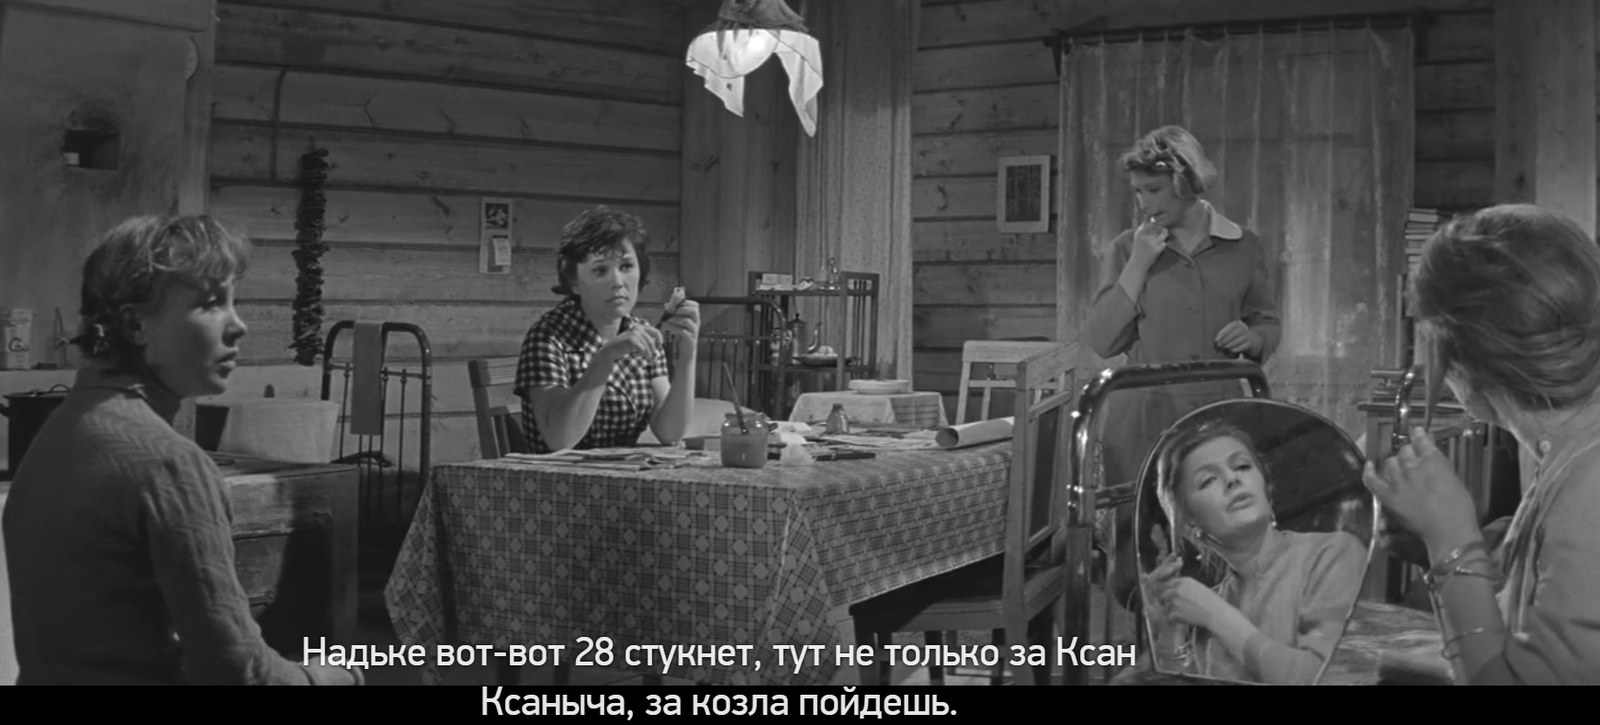 Somewhere I took a wrong turn - Girl, Movie Girls, the USSR, Substandard, Social phobia